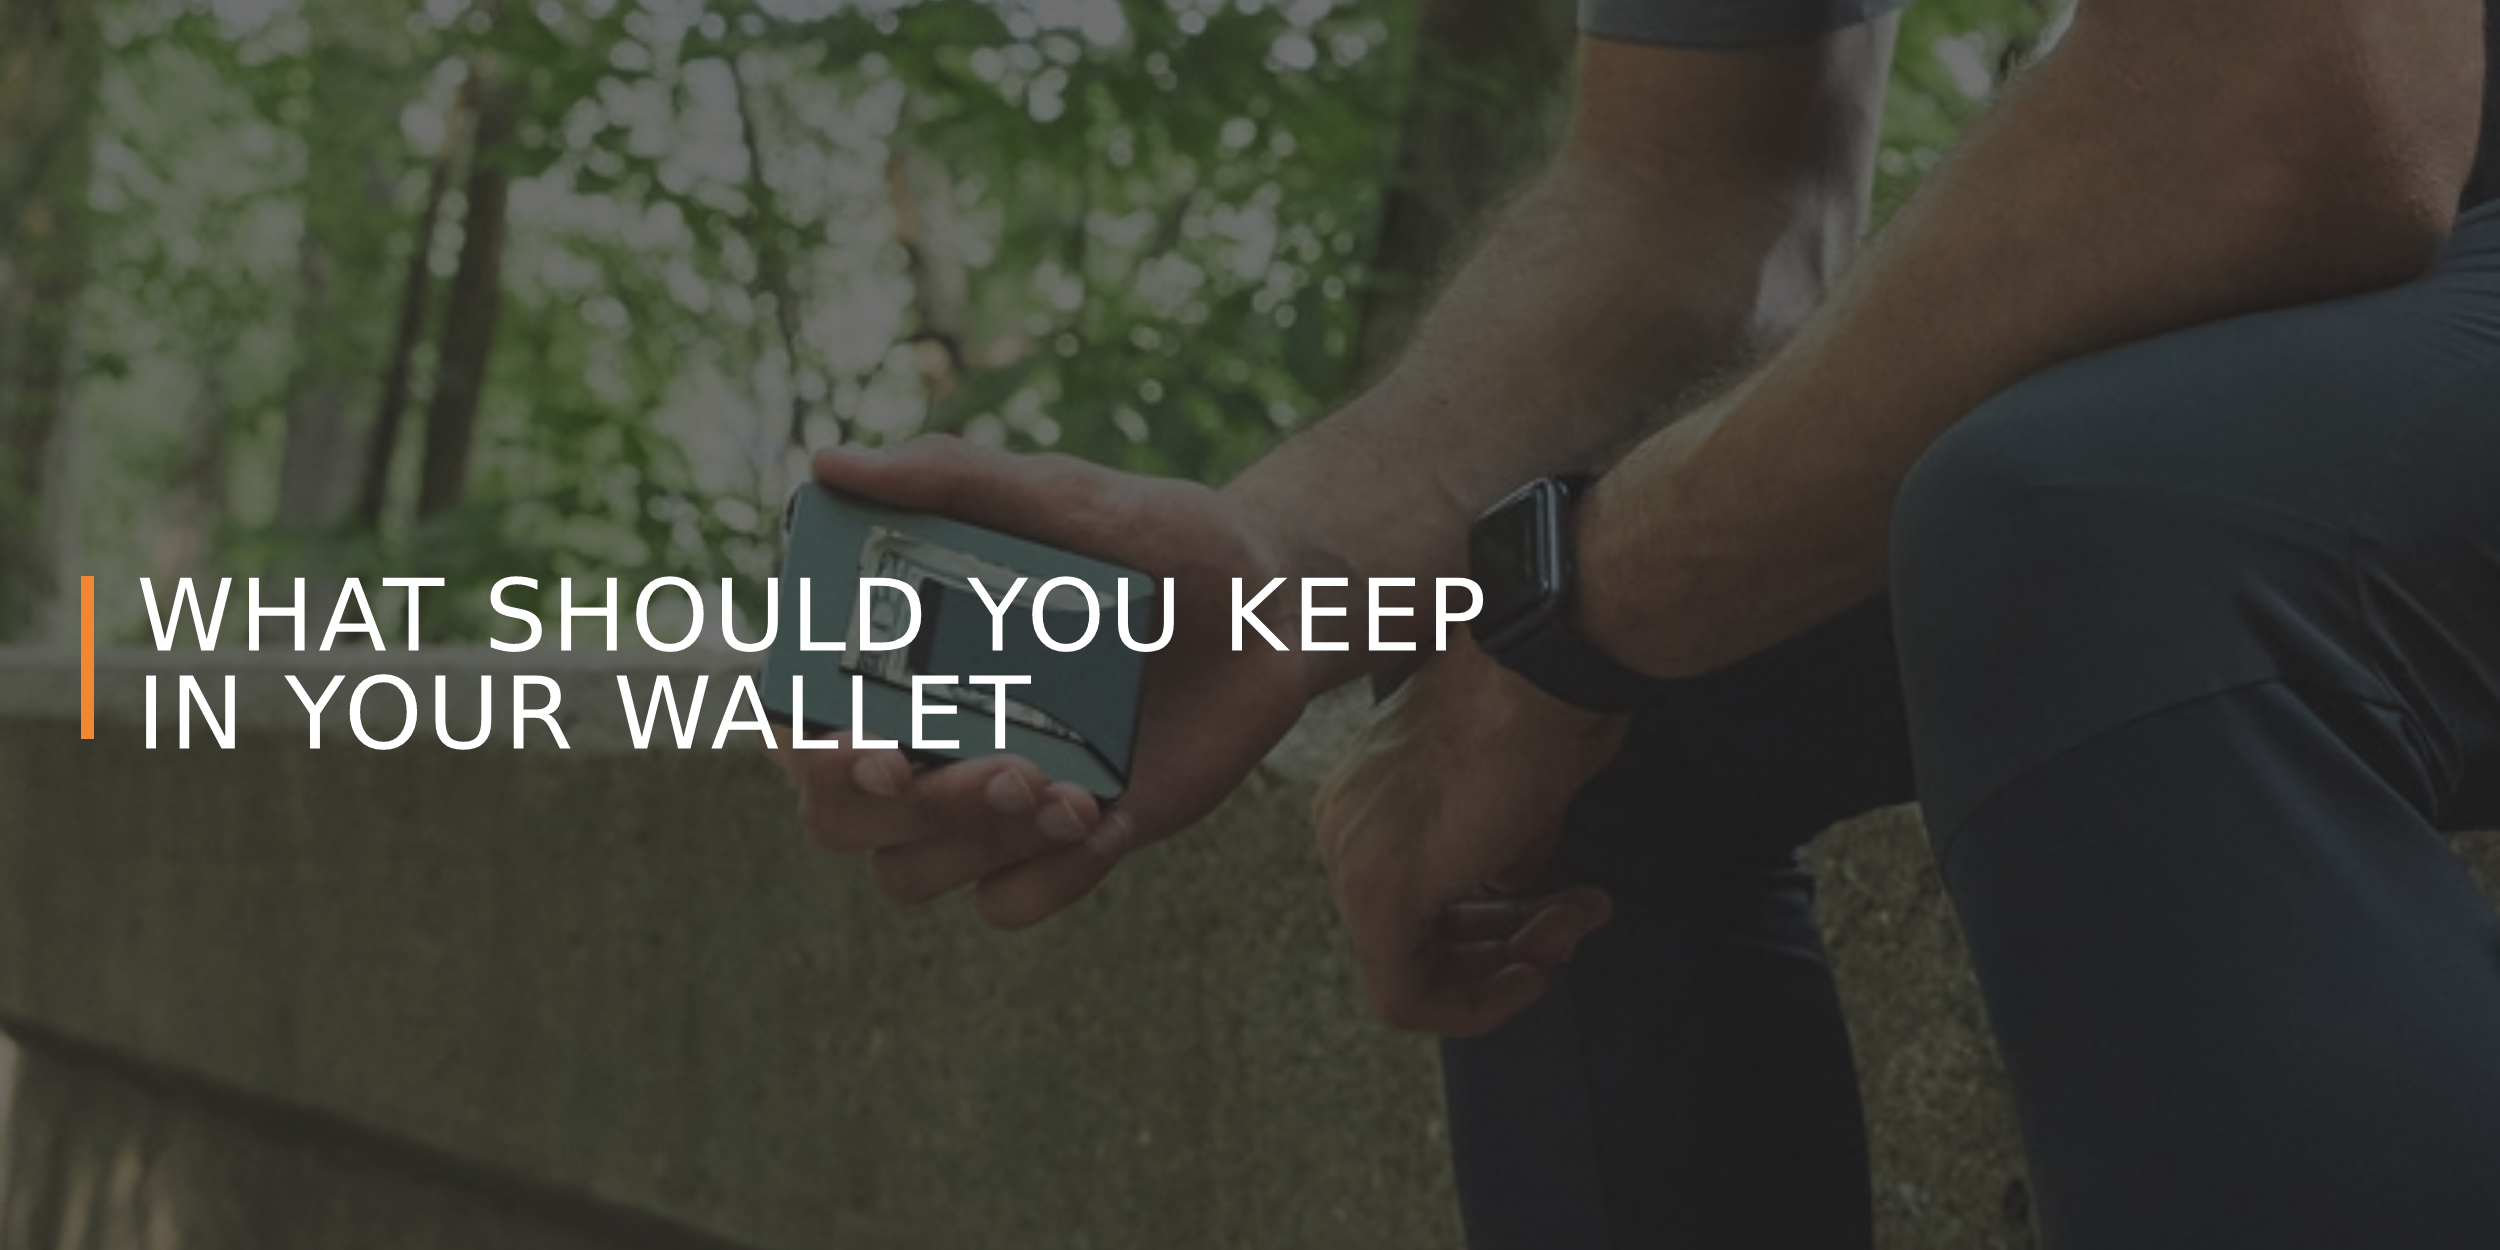 What Should You Keep in a Wallet